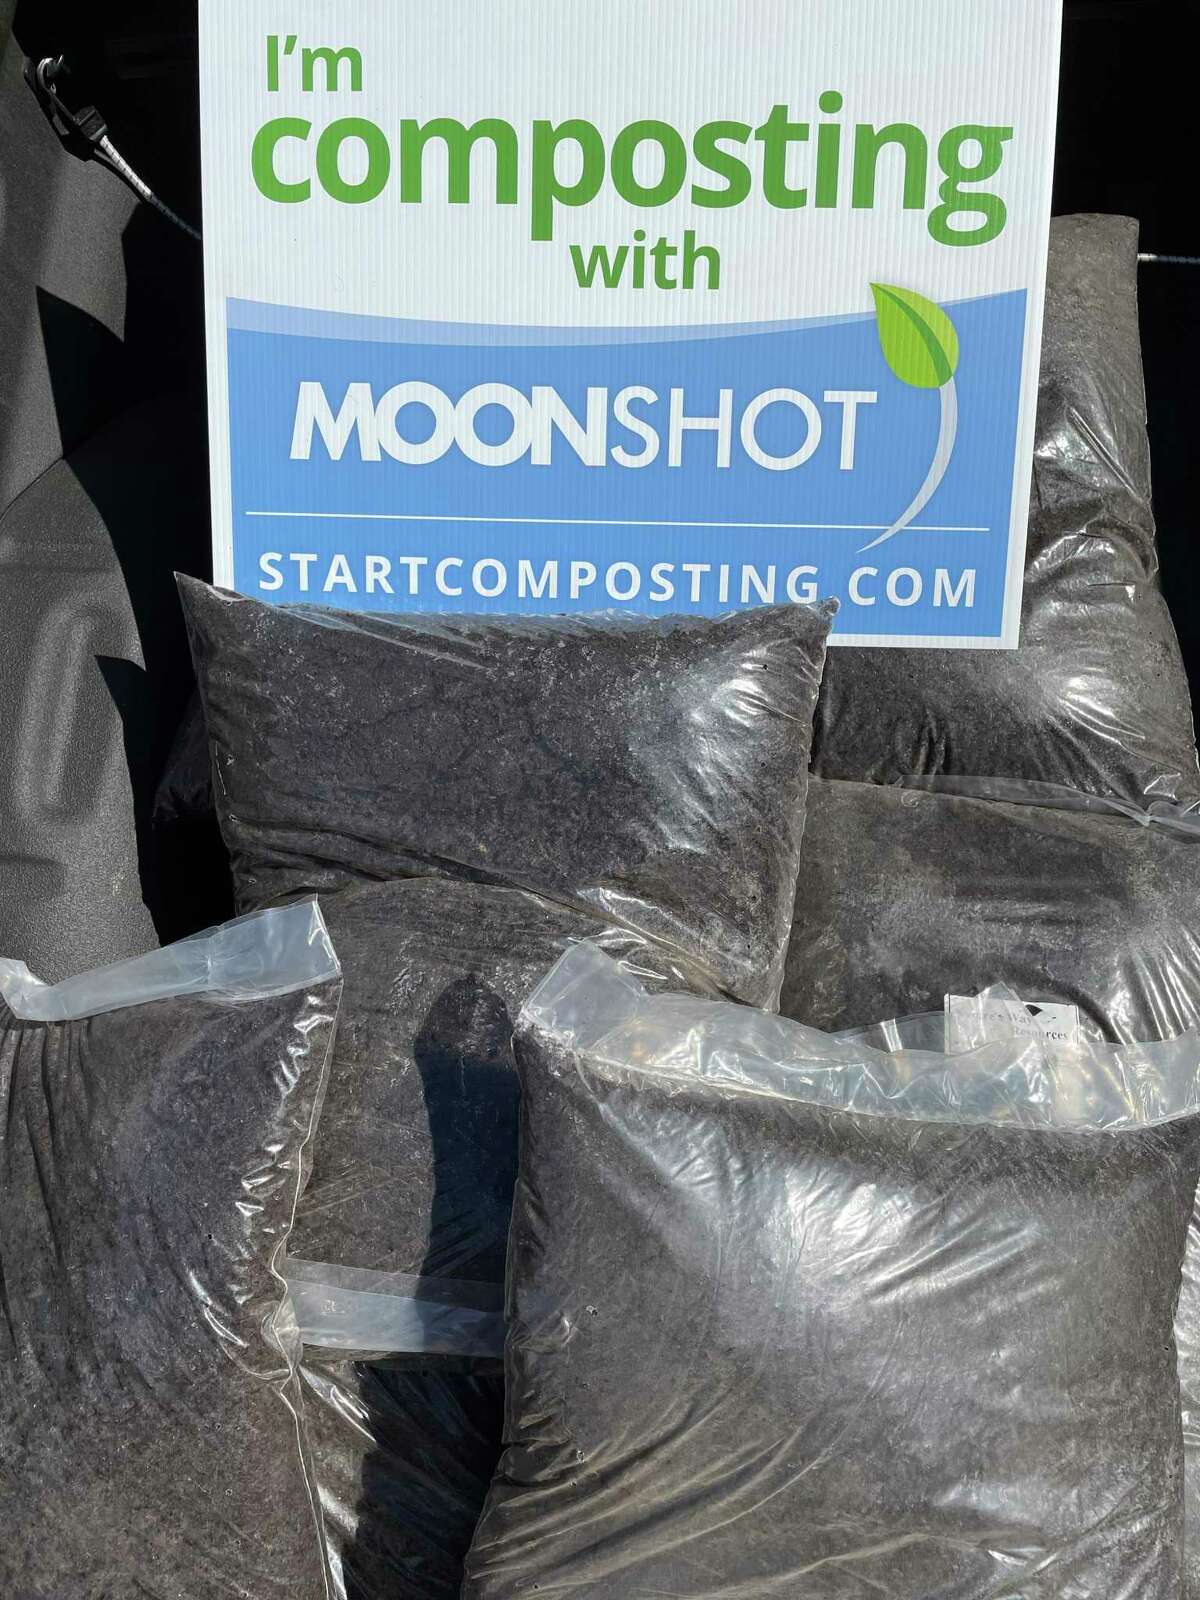 Moonshot Compost takes food waste from residential and commercial clients, brings it to an industrial composting facility, then returns the compost to their clients.